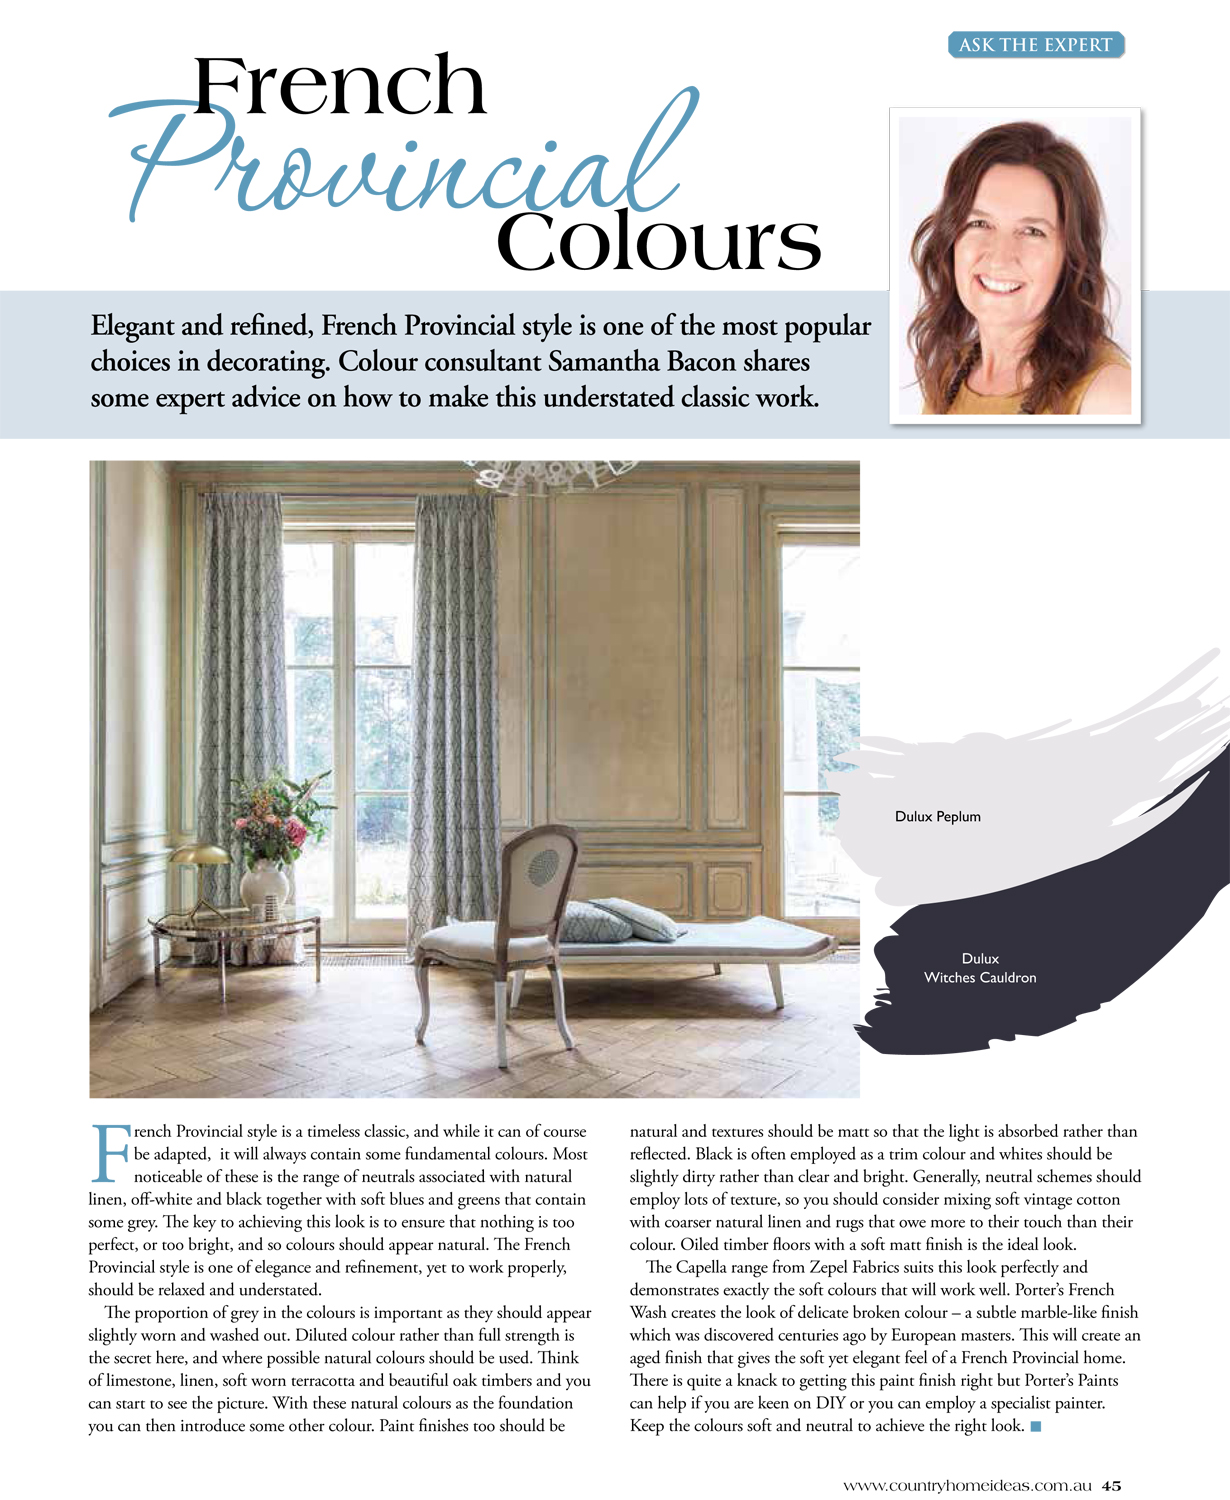 Country Home Ideas magazine - French Provincial Colours